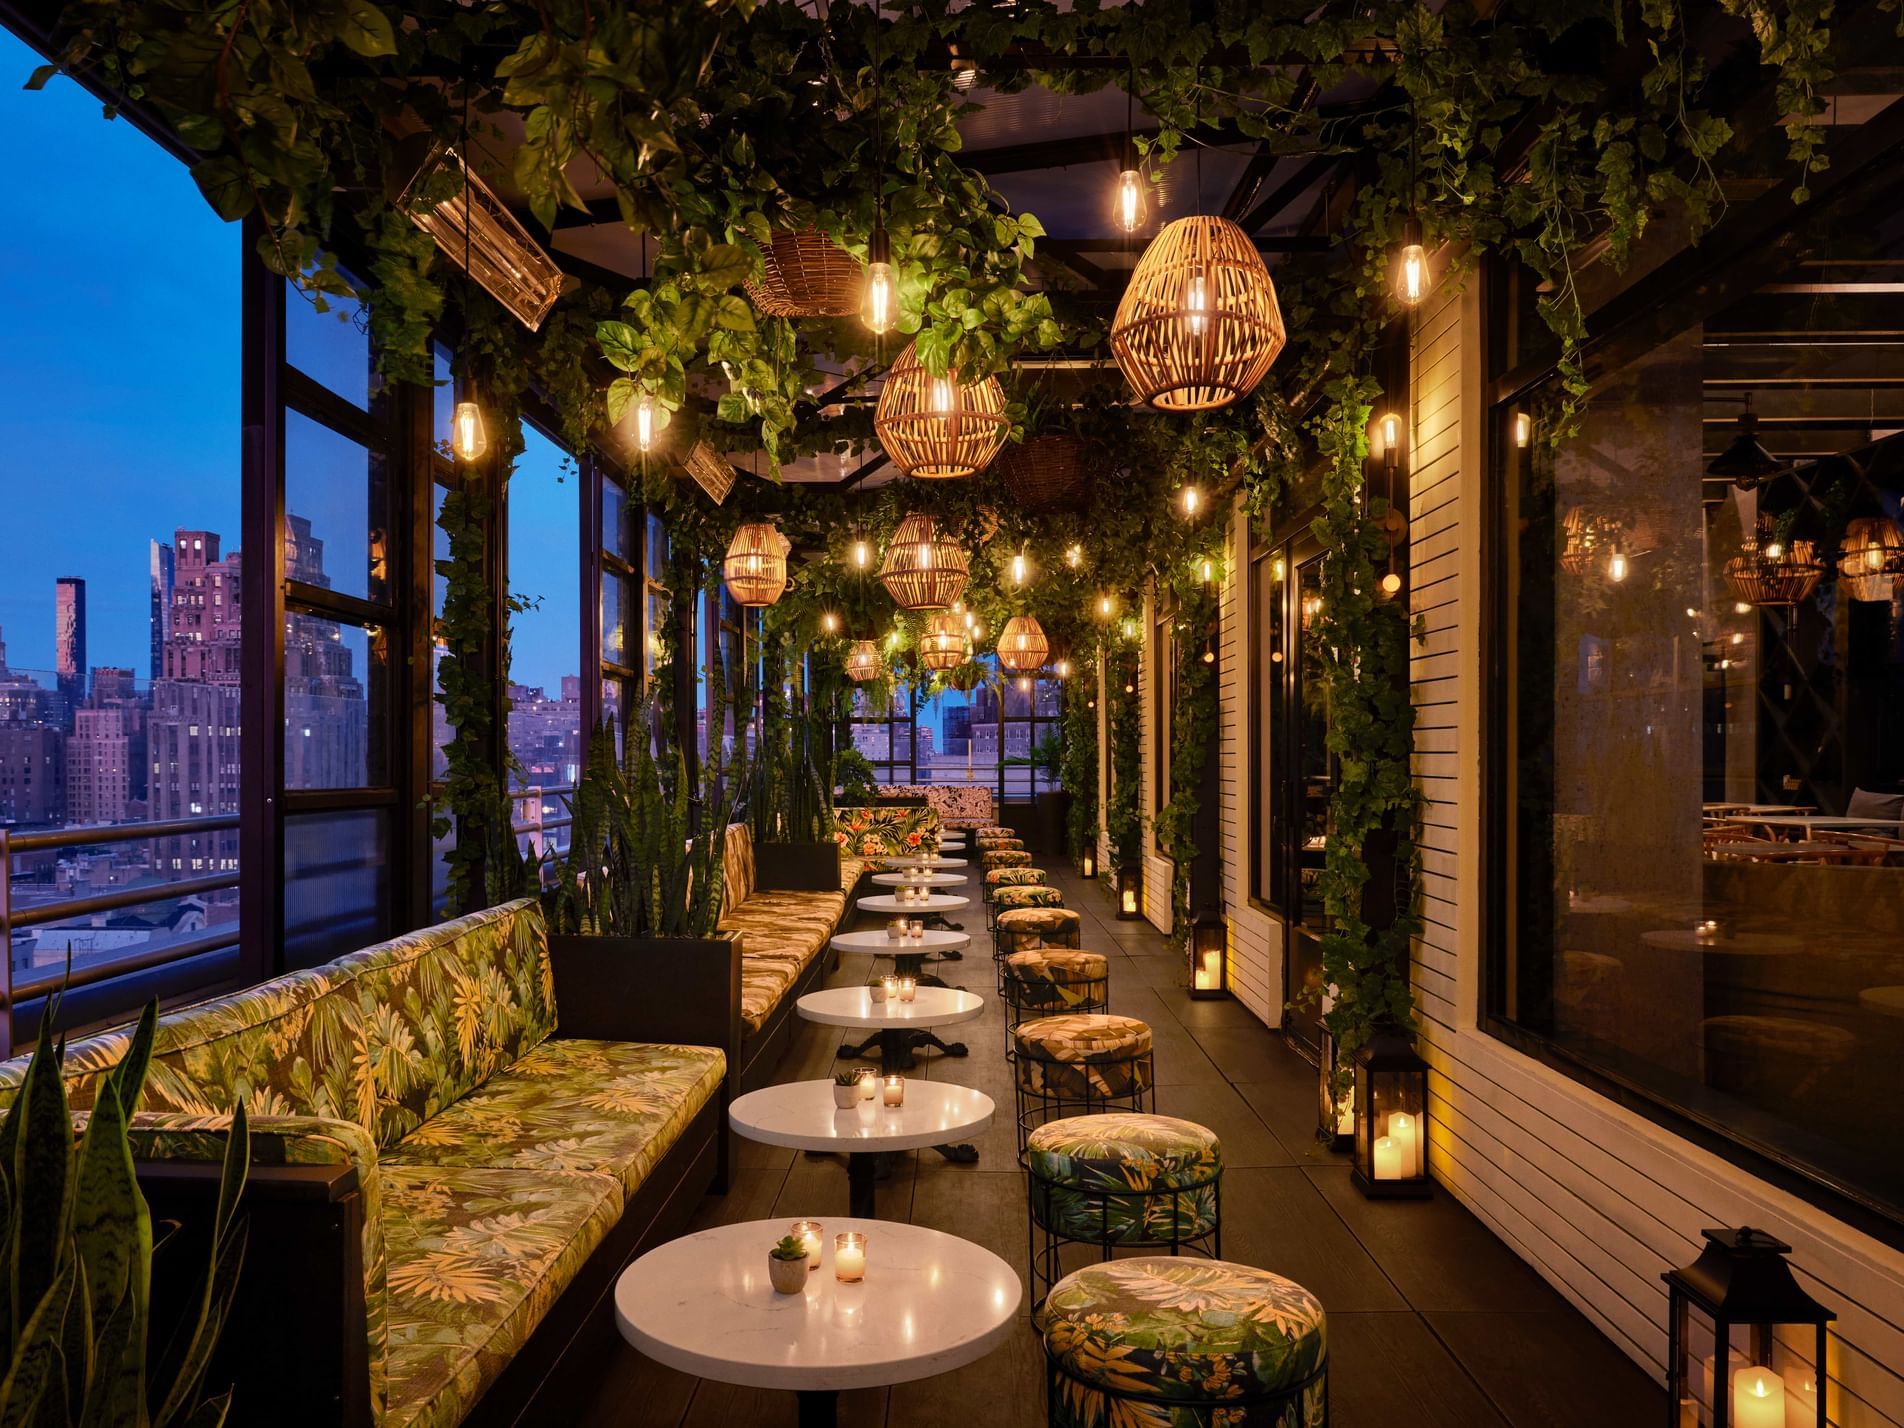 Gansevoort North Terrace outdoor seating with view of Manhattan skyline